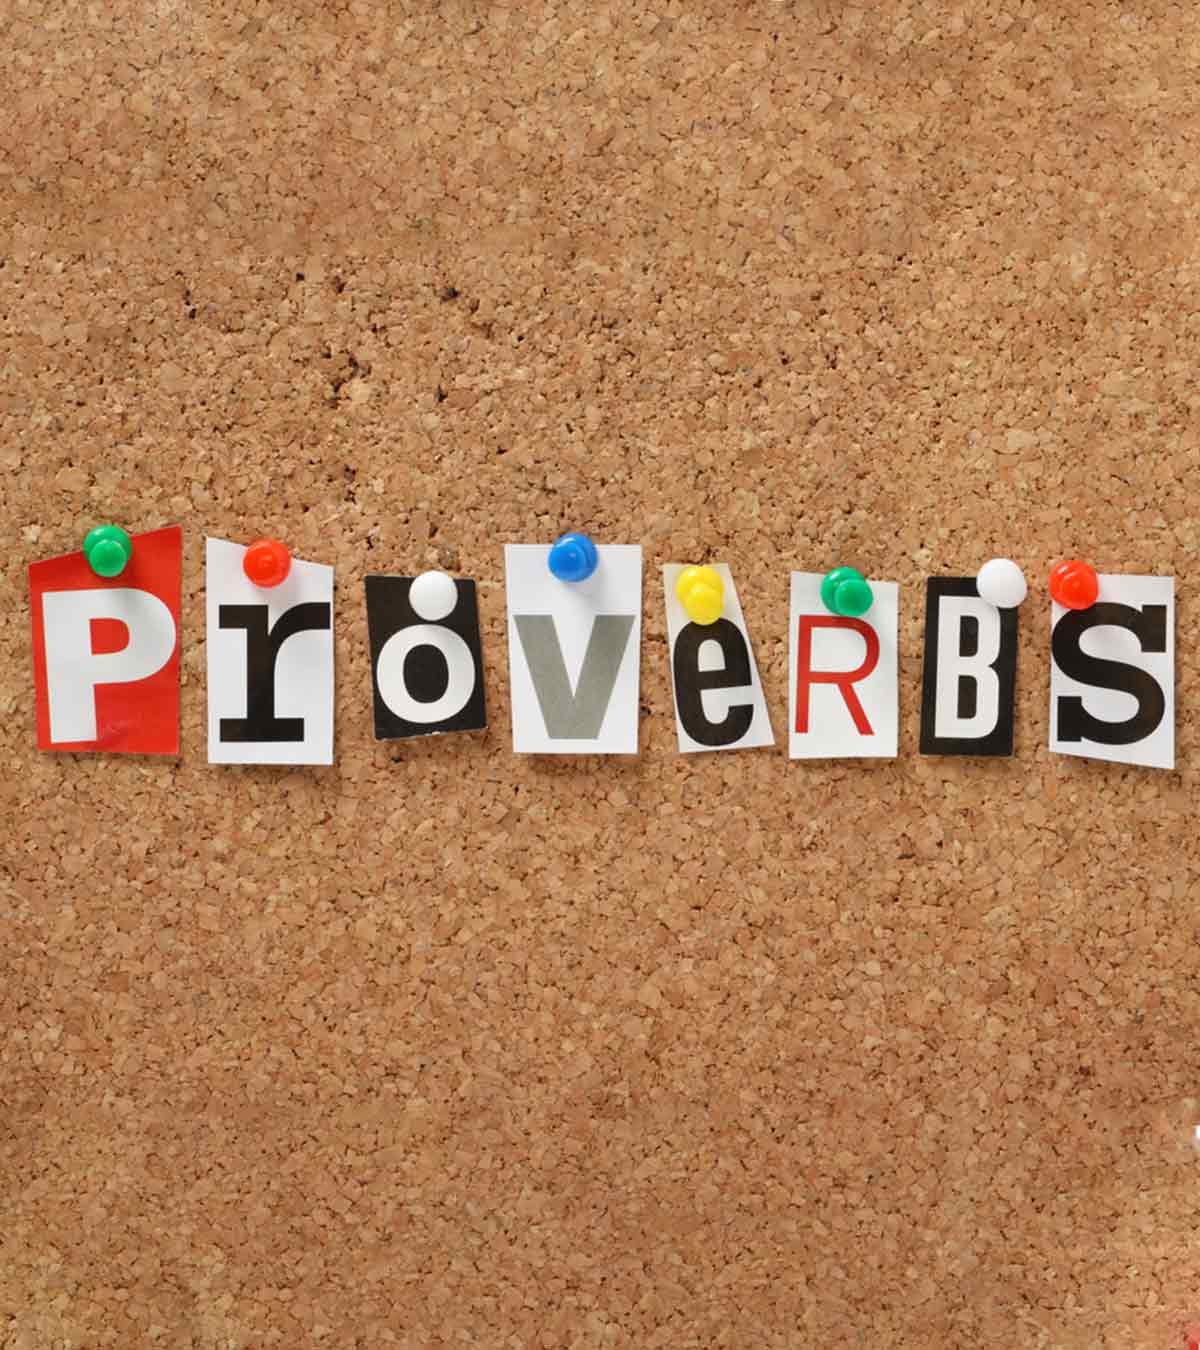 30 Best English Proverbs For Children, With Meanings